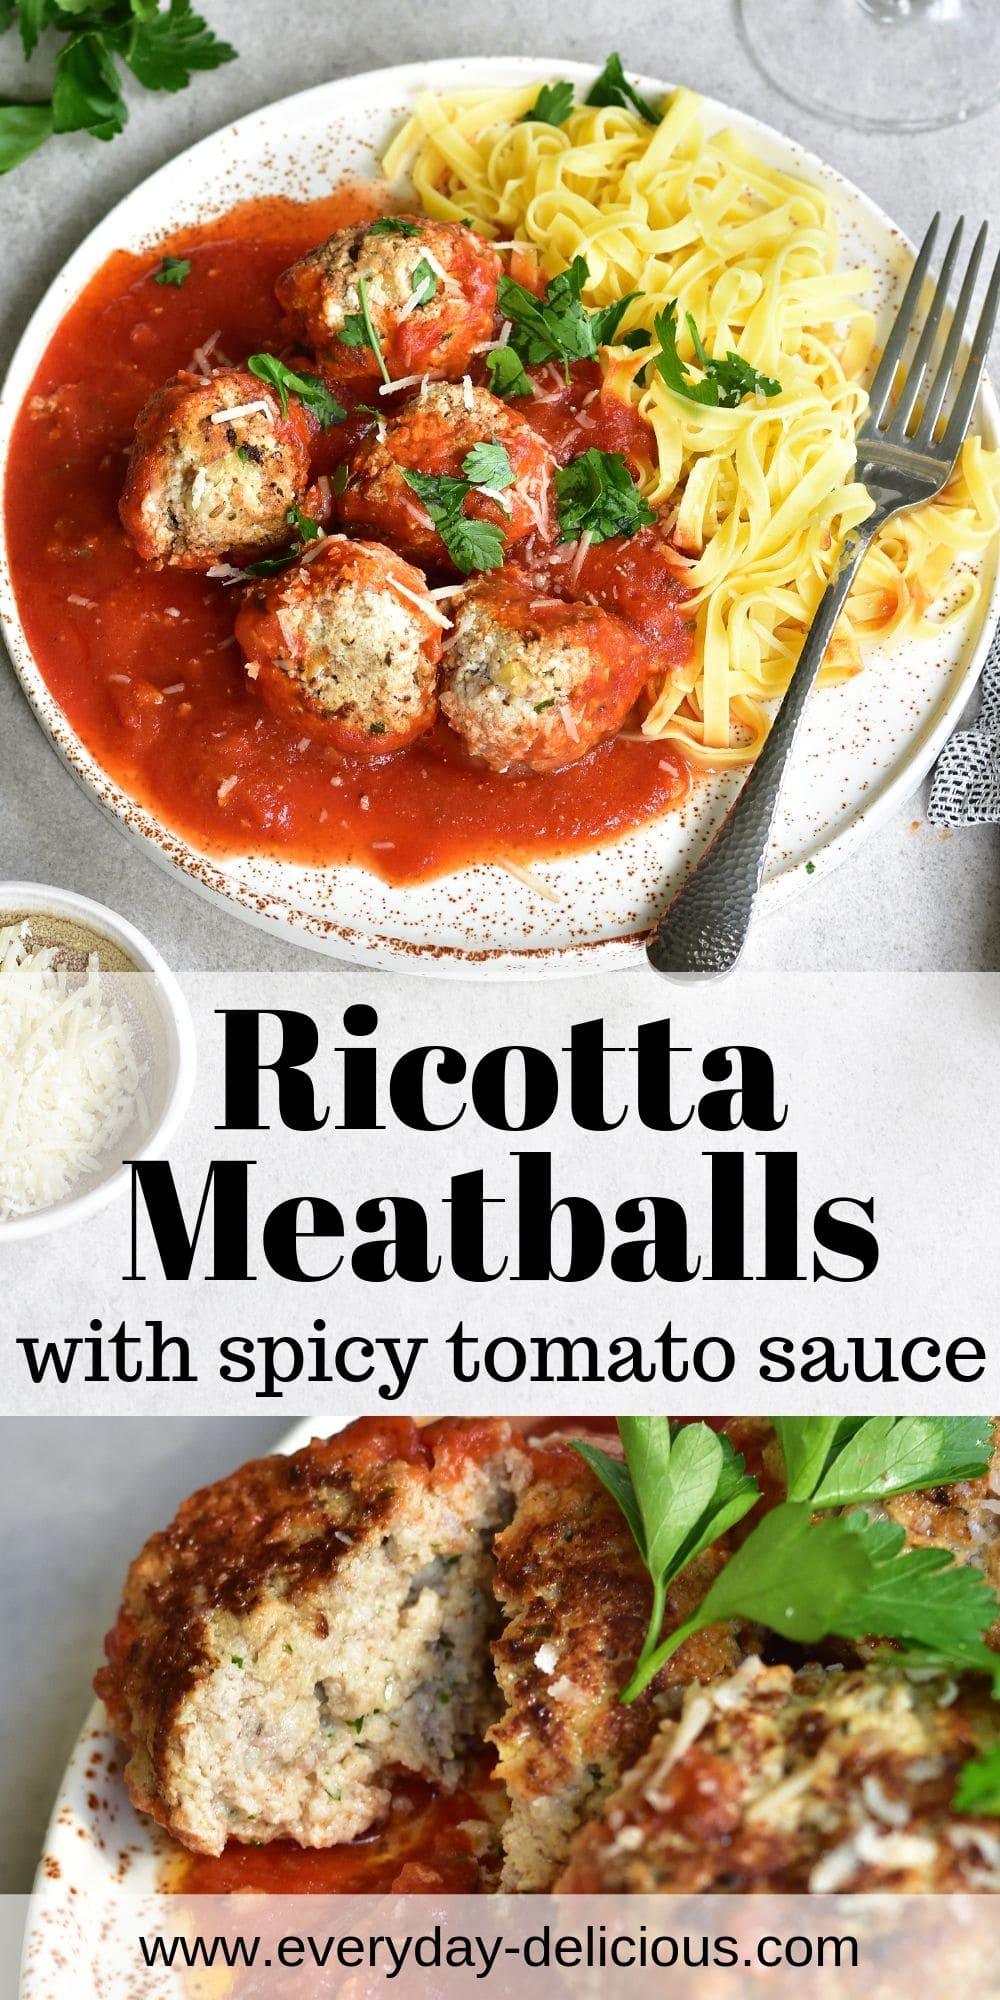 Ricotta meatballs with spicy tomato sauce - Everyday Delicious